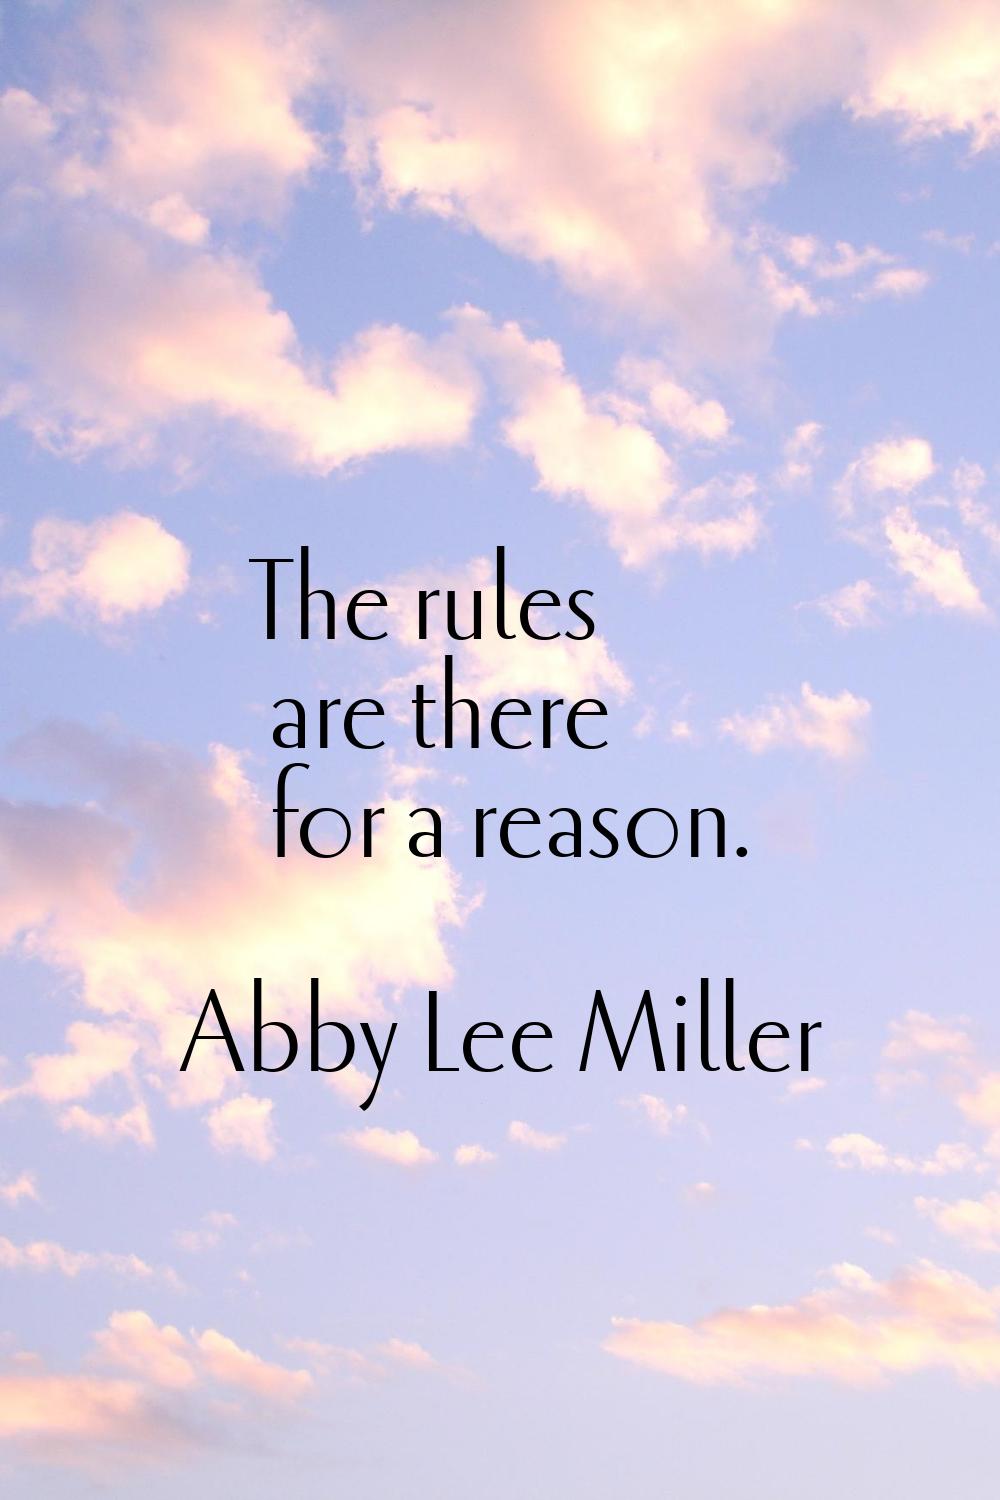 The rules are there for a reason.